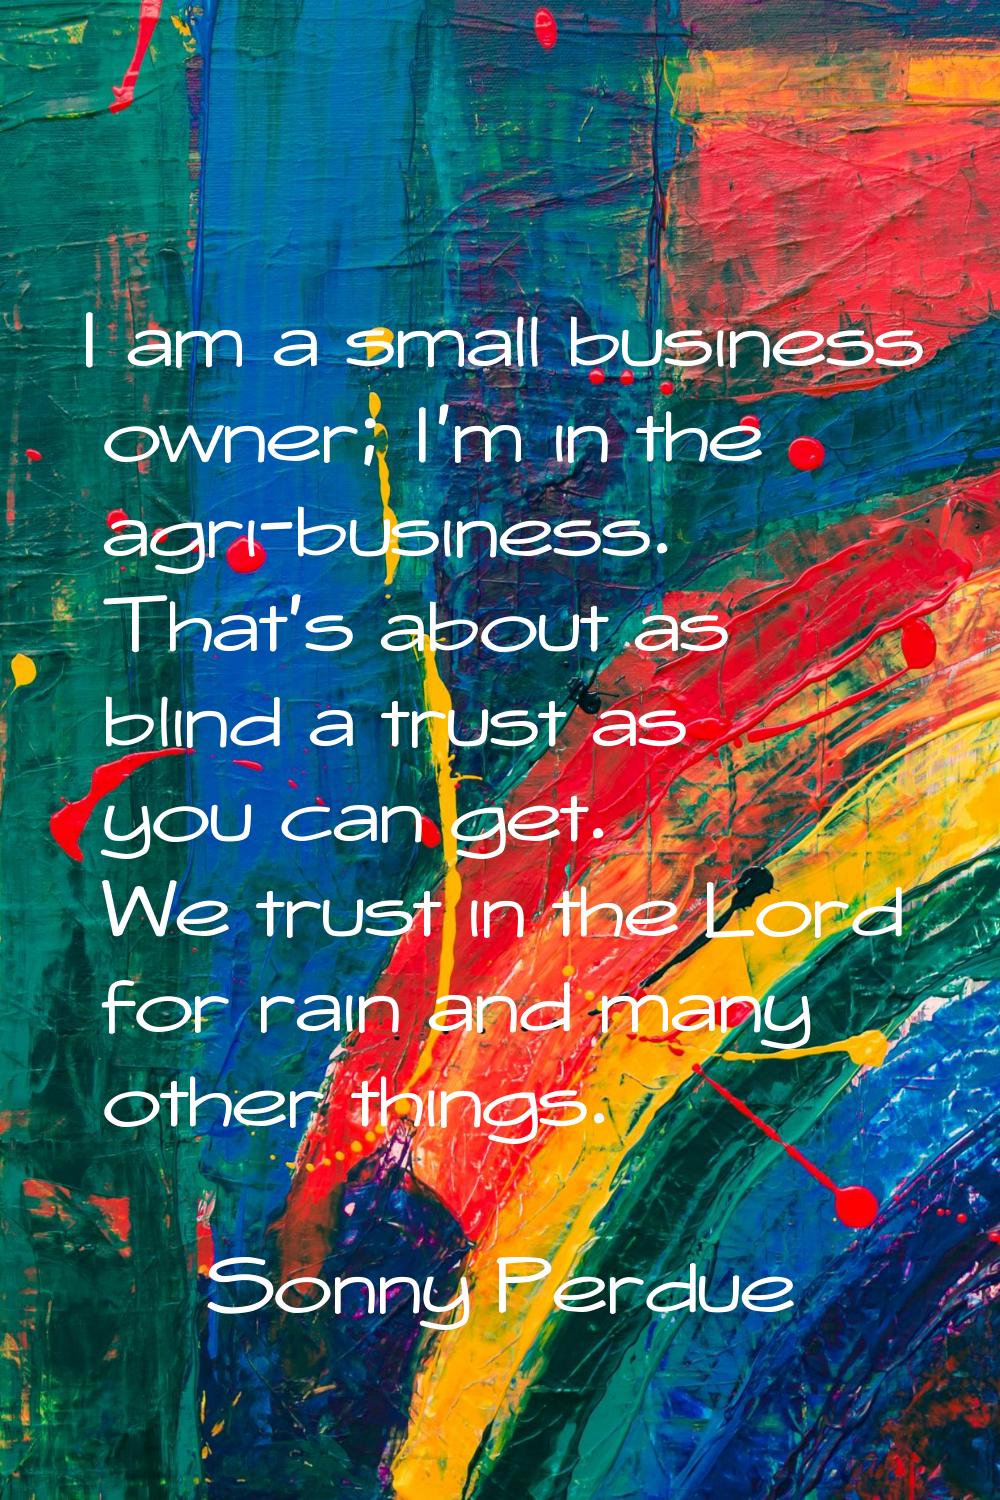 I am a small business owner; I'm in the agri-business. That's about as blind a trust as you can get